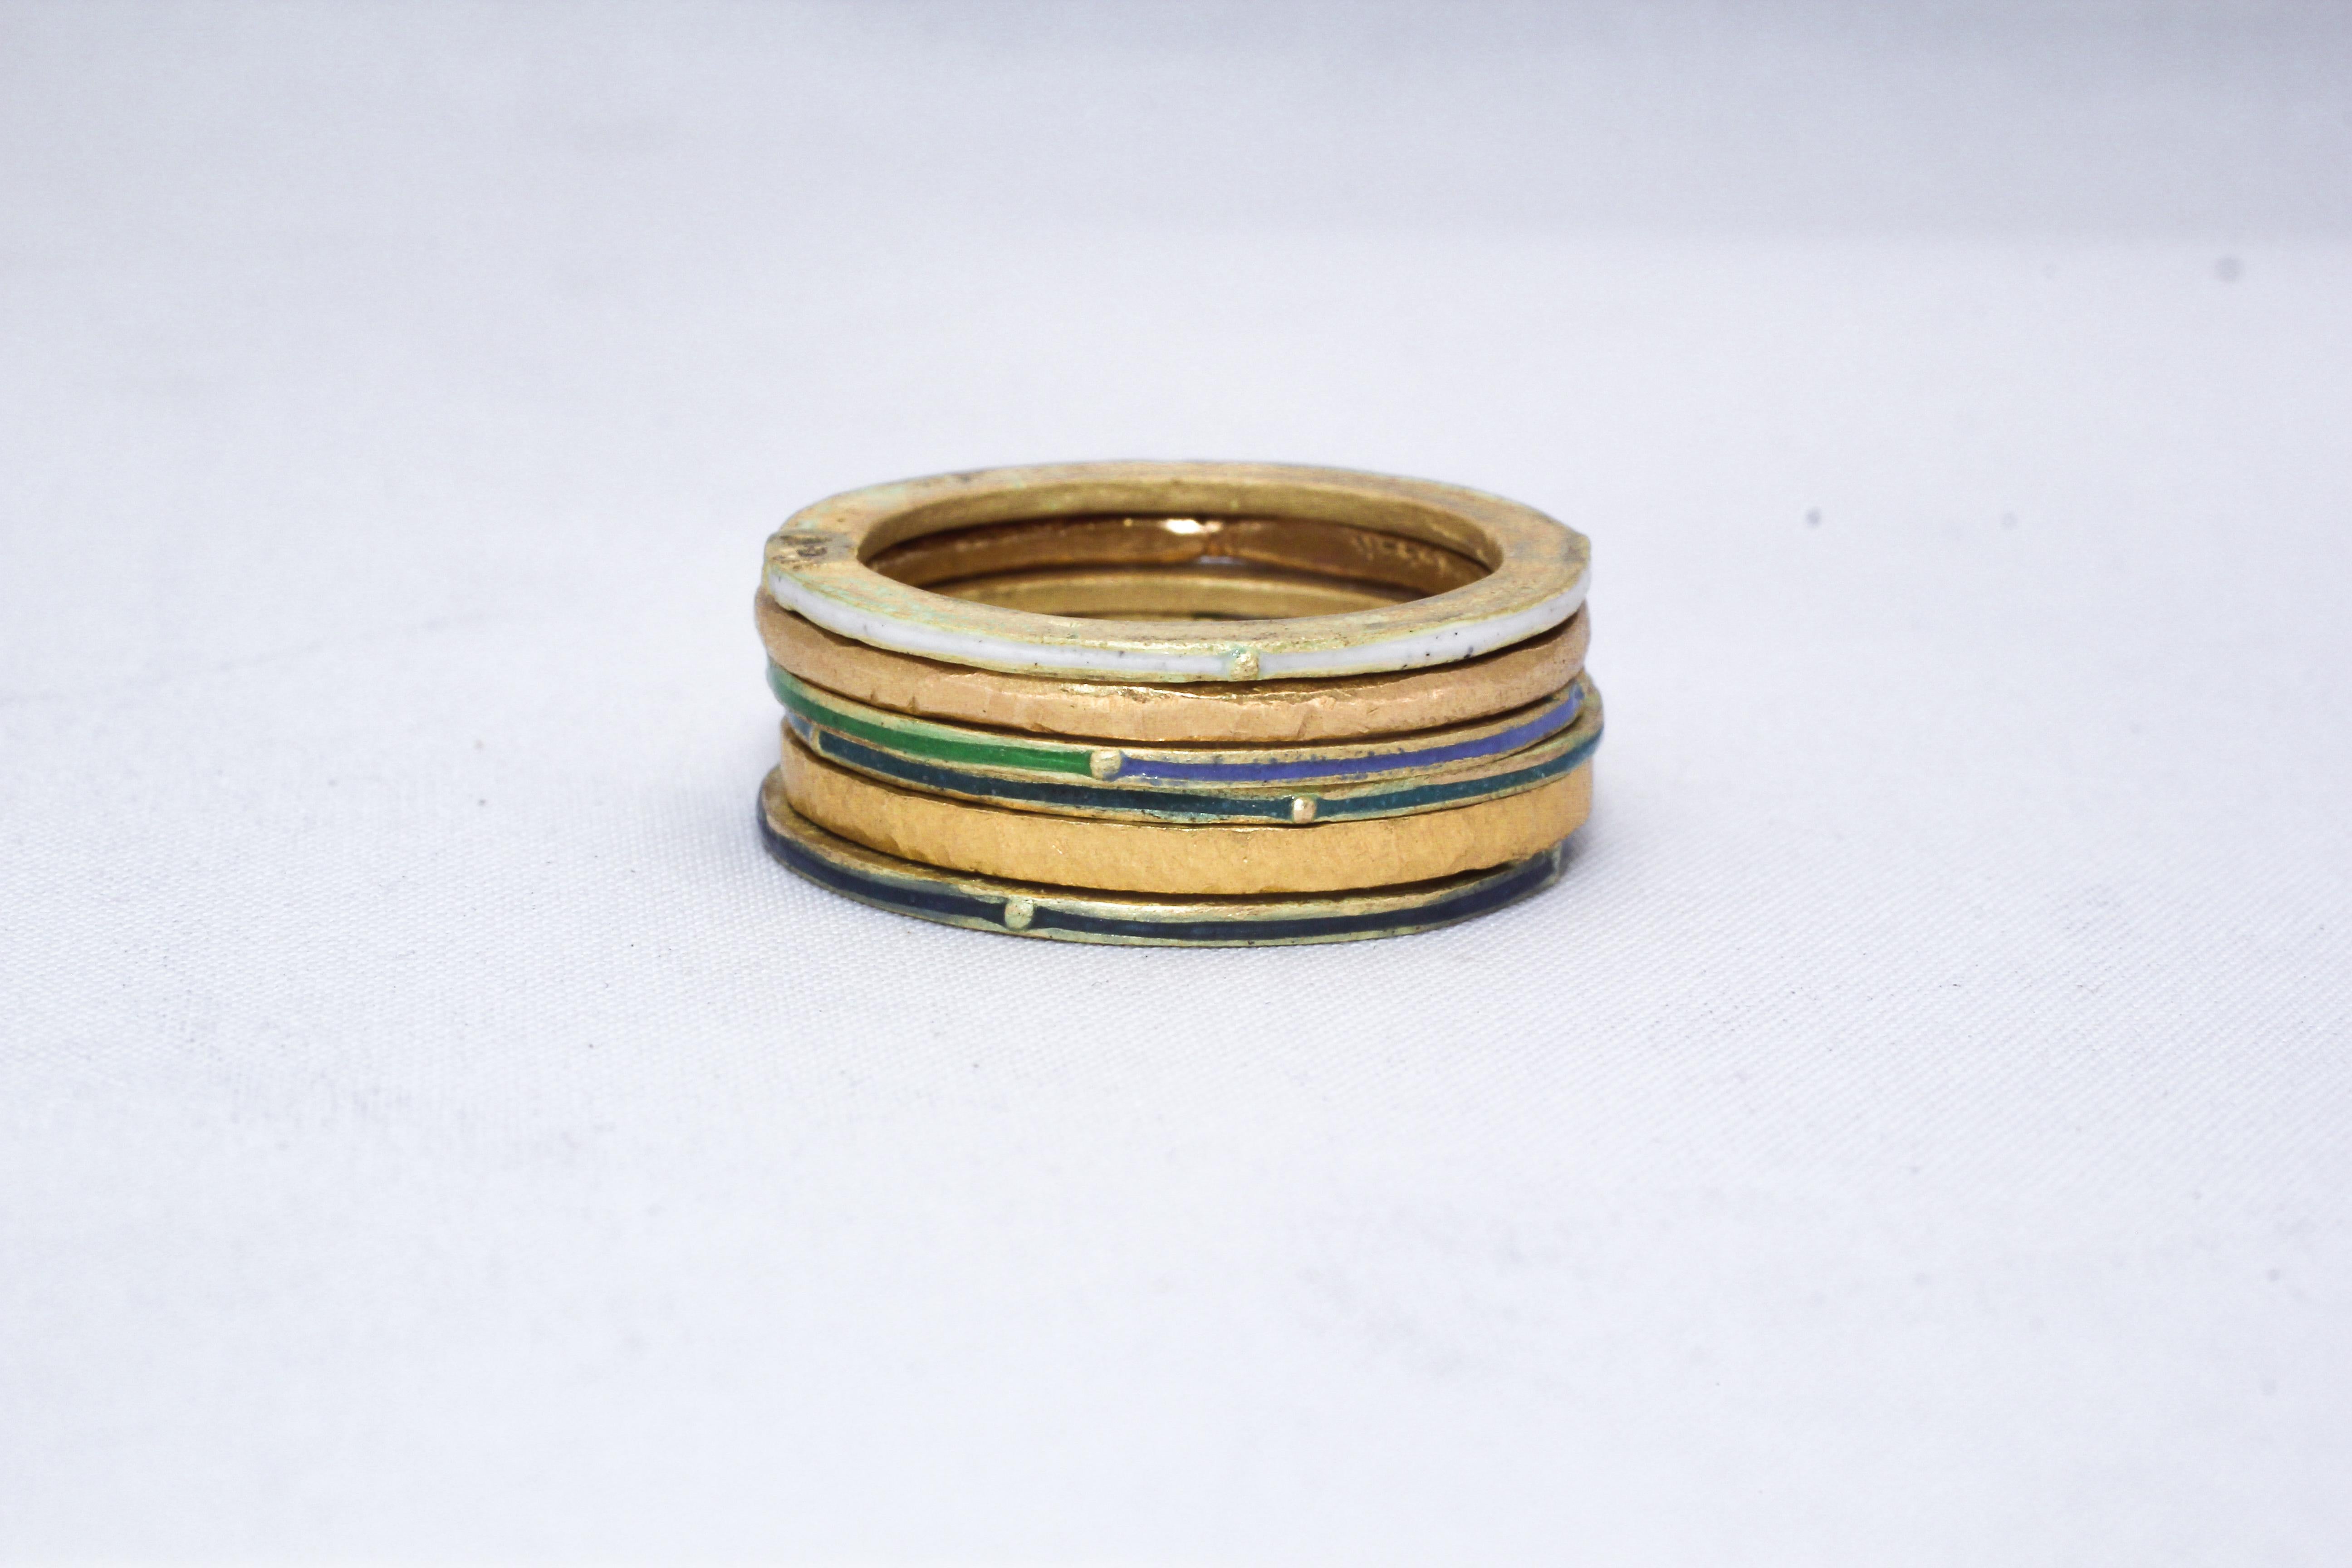 Custom order. 18K and 22K recycled gold and enamel wedding or fashion stack of rings in this modern art design. This vibrant stack of 6 fashion or wedding rings combines our 22k gold large and medium bands with 4 18k gold rings colored with bright